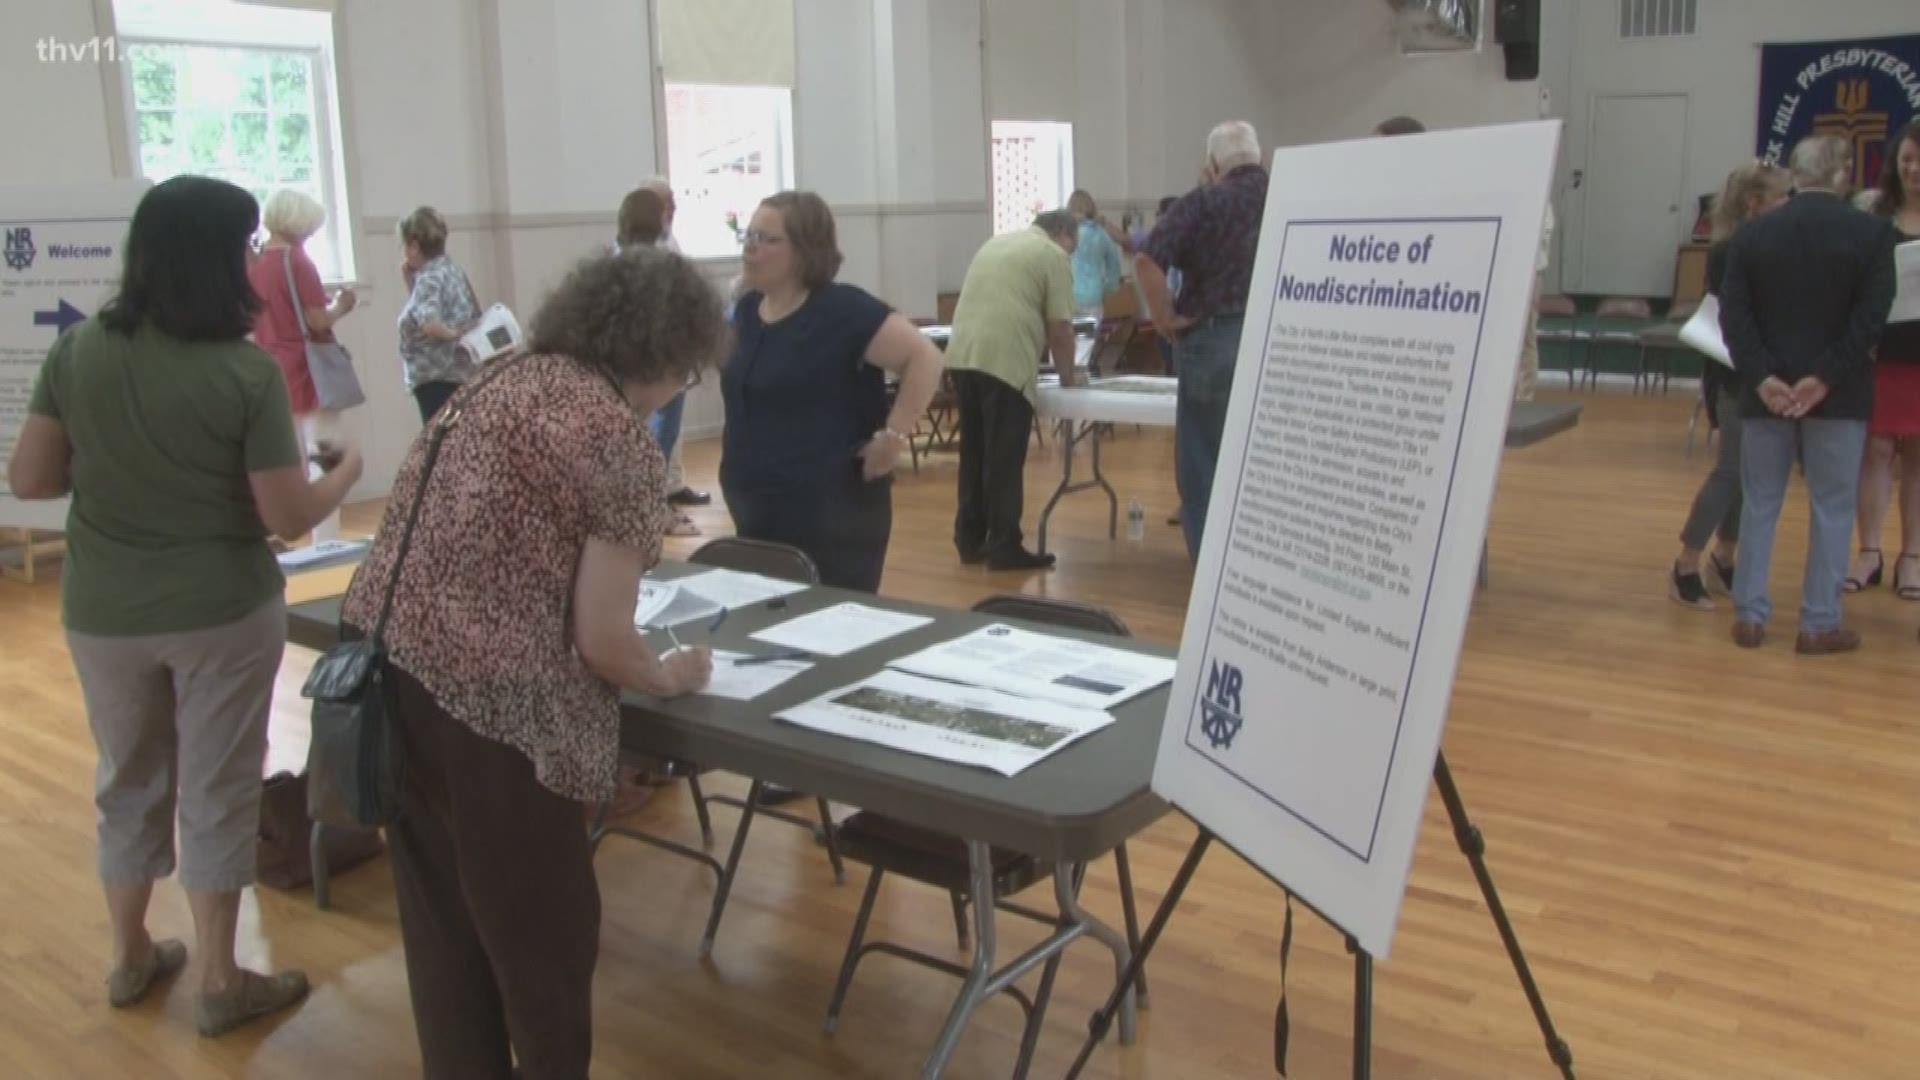 Engineers presented their plans for a new Park Hill during a public meeting in North Little Rock.